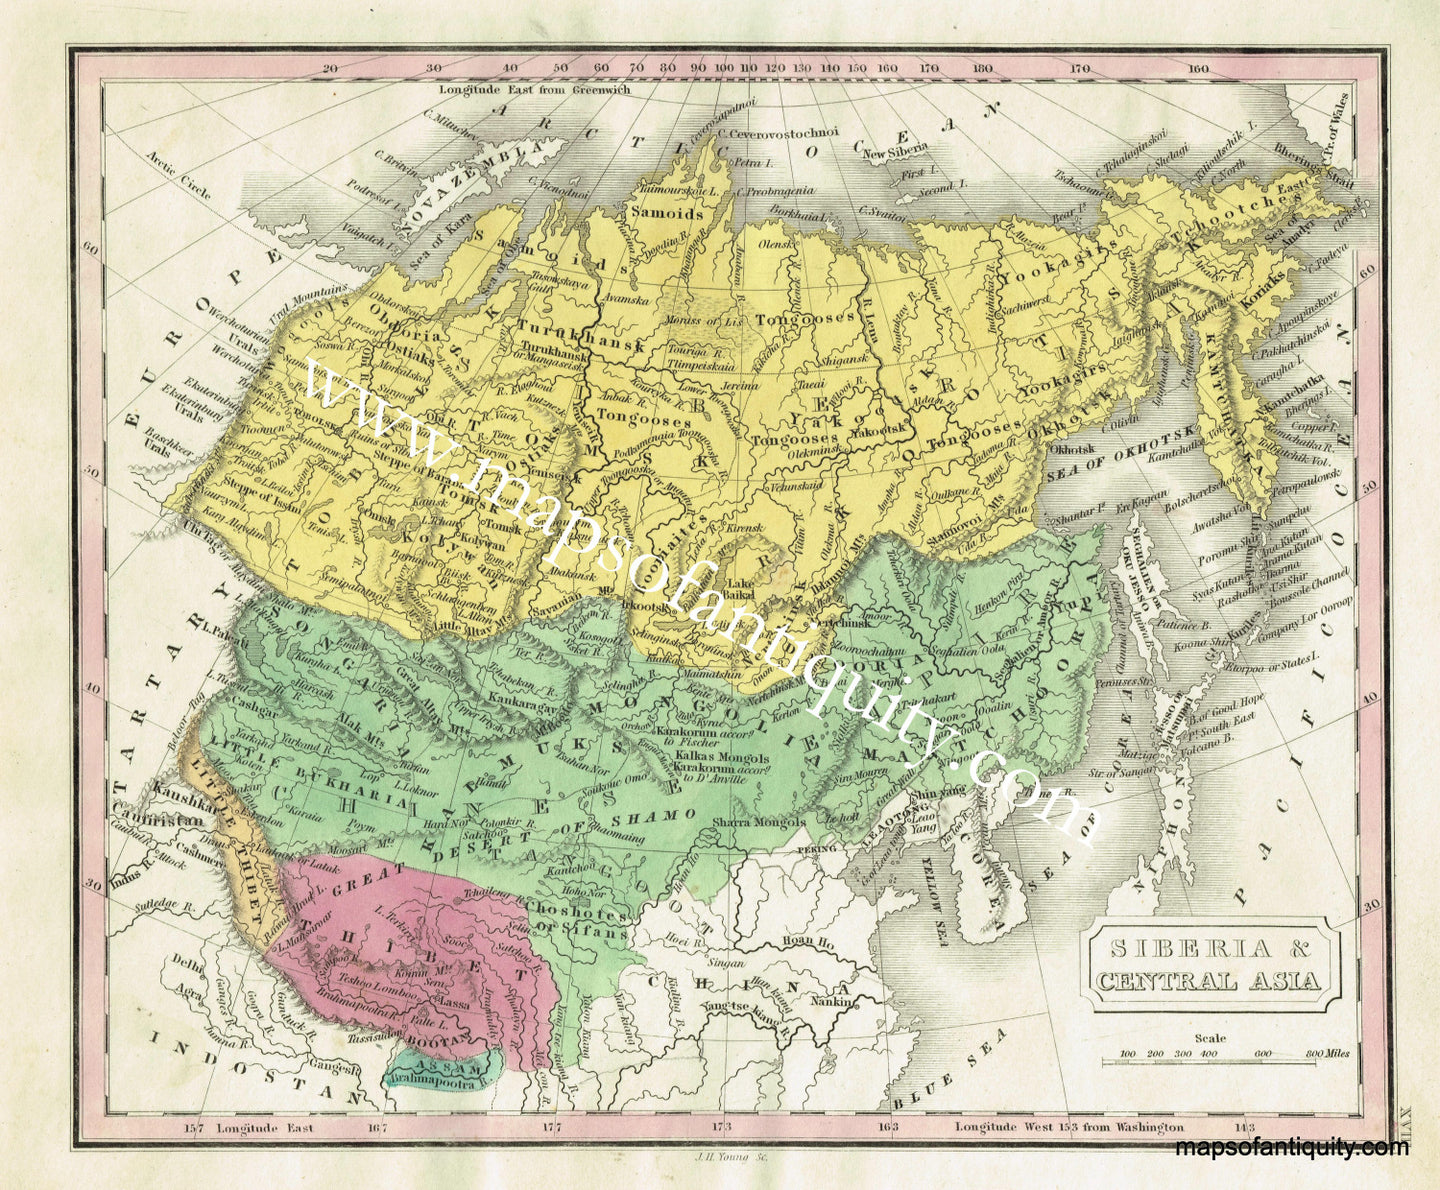 Antique-Hand-Colored-Map-Siberia-and-Central-Asia.-Asia-Siberia-1828-Malte-Brun-Maps-Of-Antiquity